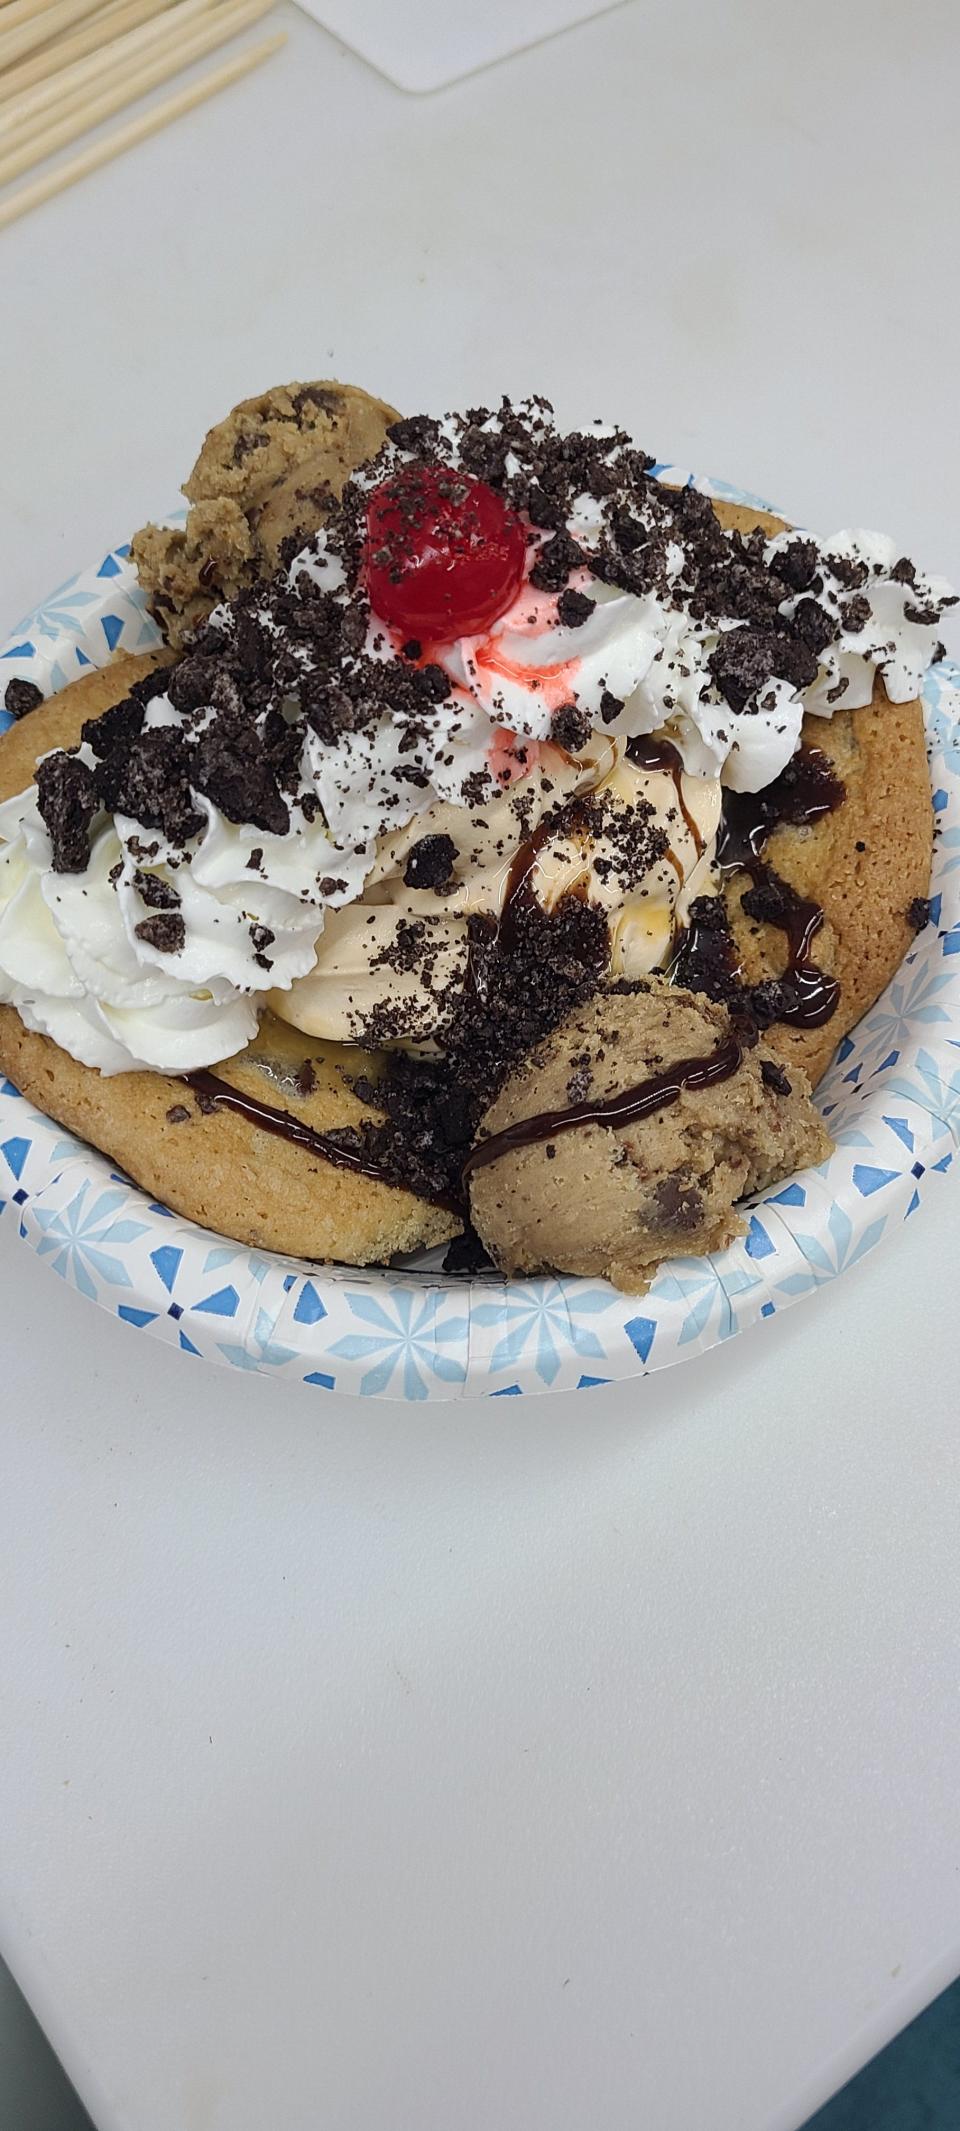 The Cookie Dough Explosion features a chocolate chip cookie topped with a salted caramel gelato, with scoops of cookie dough covered in hot fudge, caramel, whipped cream and Oreos.